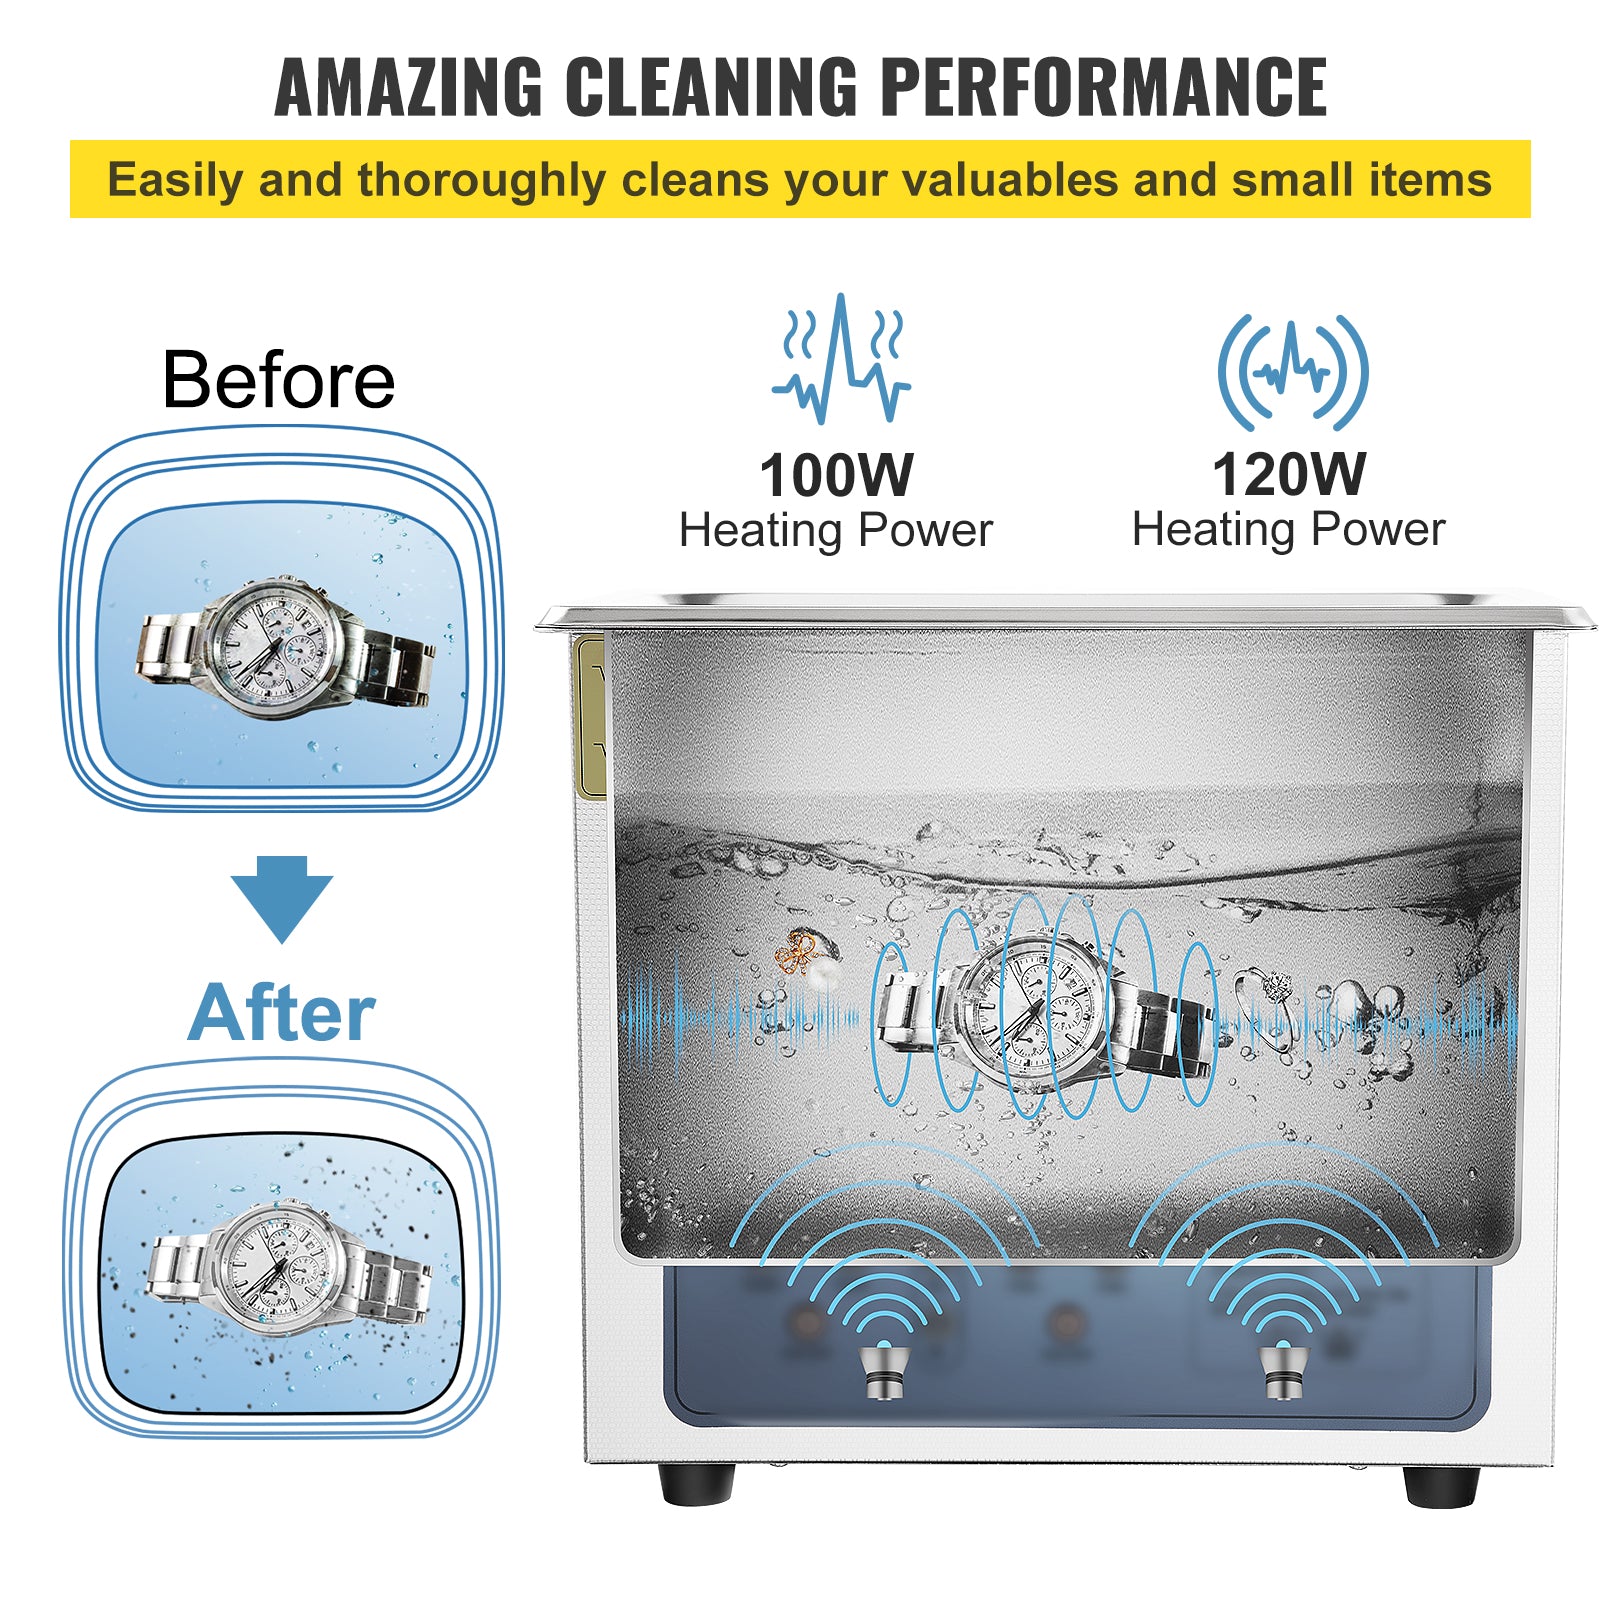 Ultrasonic Cleaner, Adjustable Frequency, Time Control